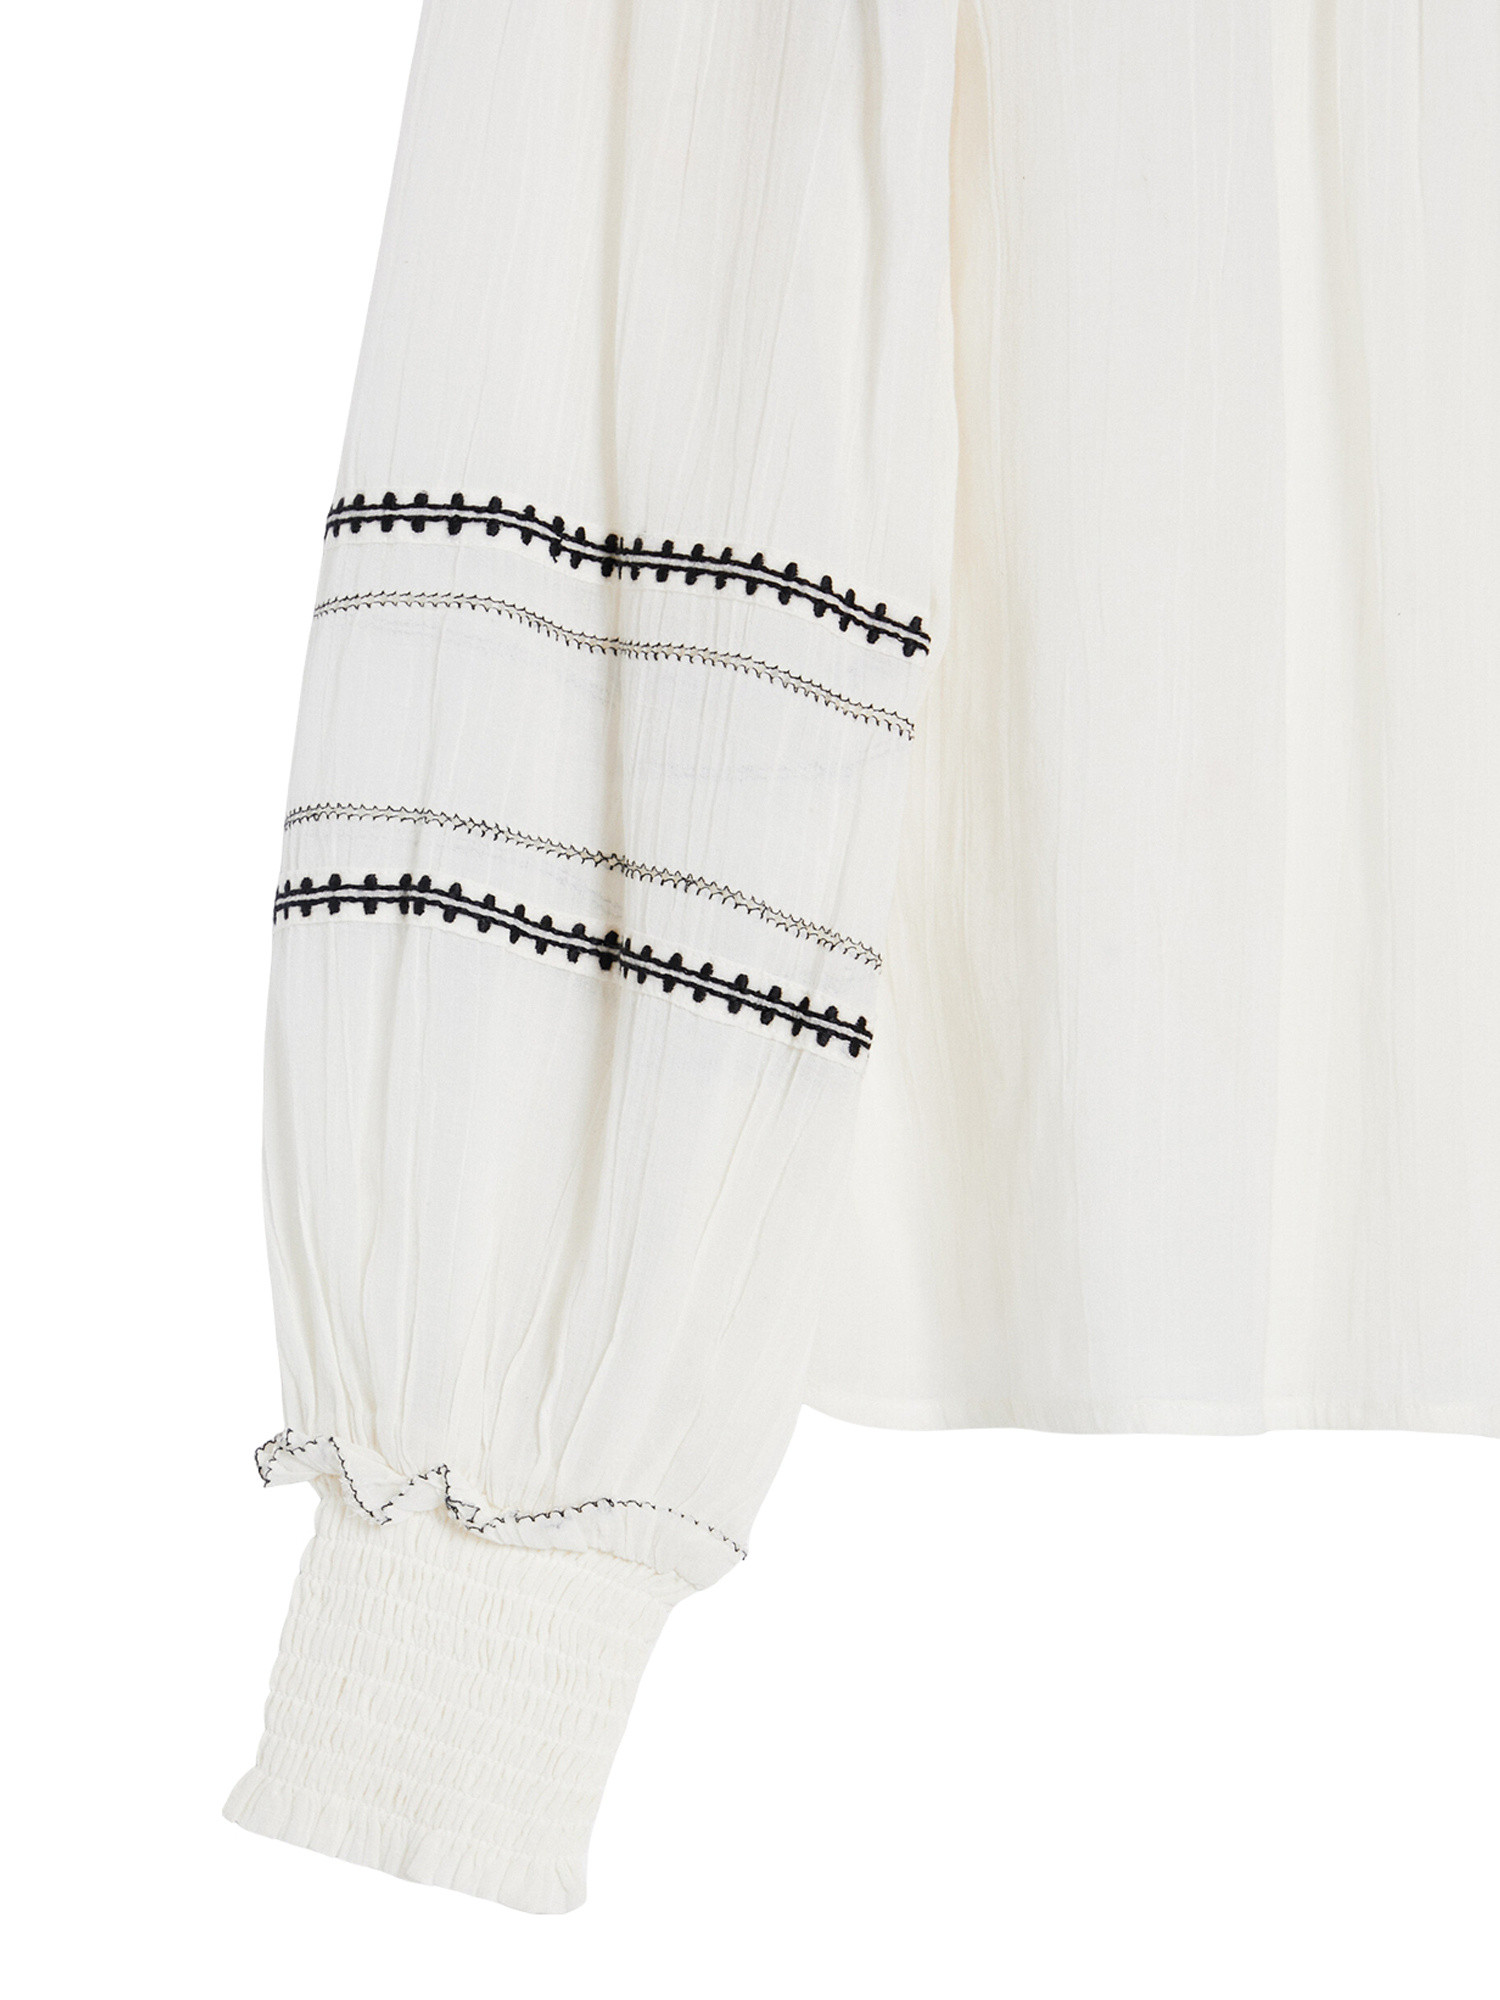 Pepe Jeans - Blouse with embroidered details, White, large image number 2